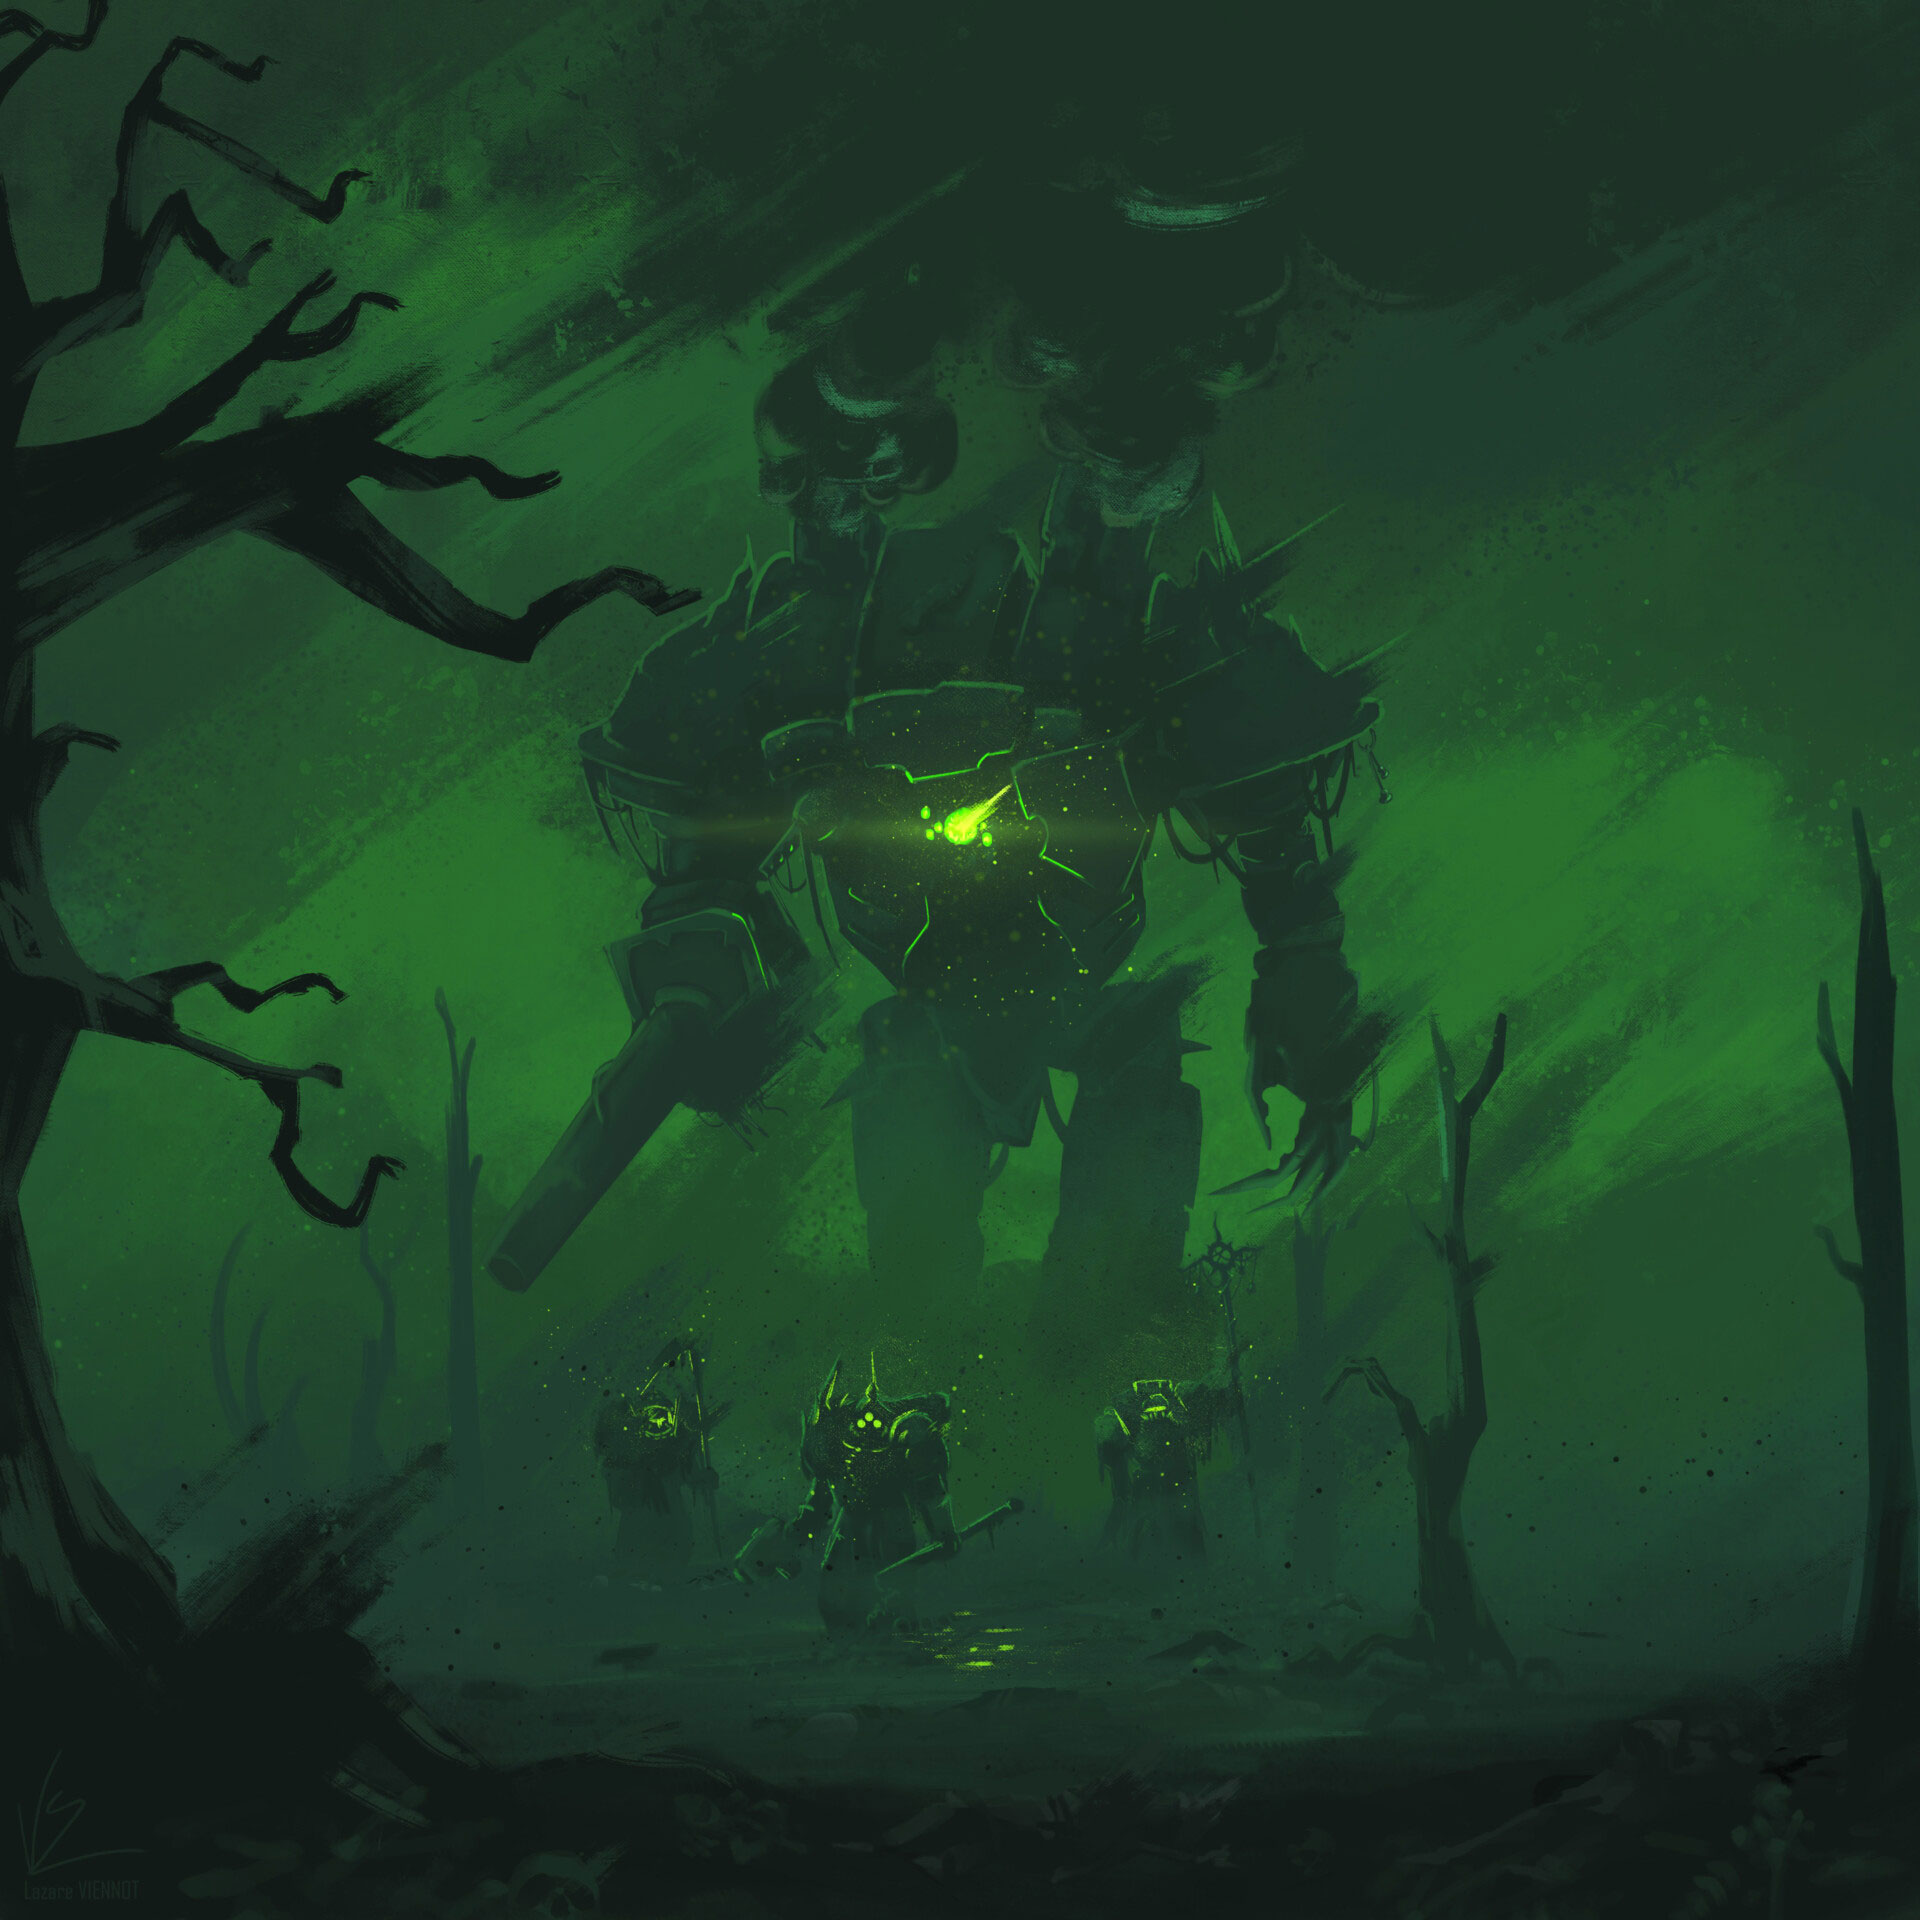 General 1920x1920 green green eyes green sky knight space marines Nurgle dead trees Plauge Marines Death Guard bolter cannons science fiction Warhammer 40,000 armor Warhammer video games video game characters